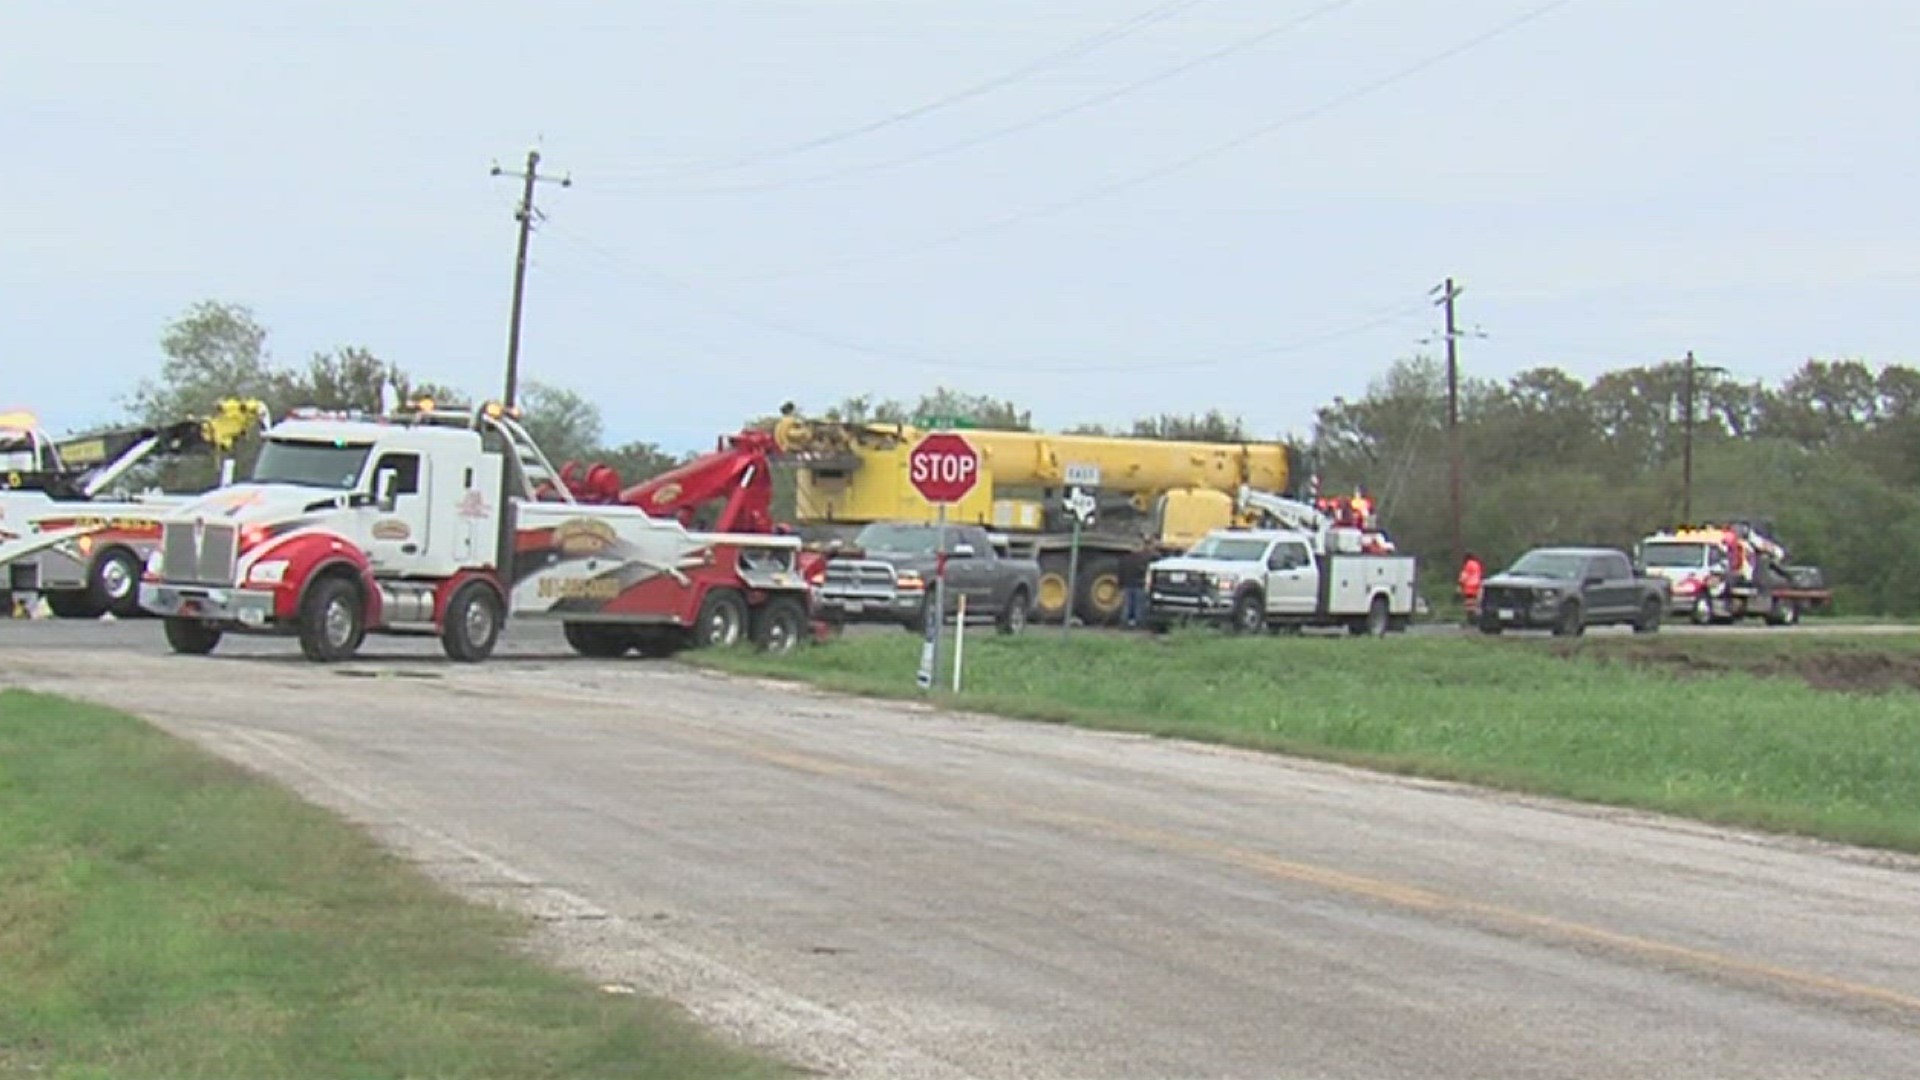 According the Texas Highway Patrol, the teens in a 2019 Expedition did not stop at a stop sign and hit a crane truck.